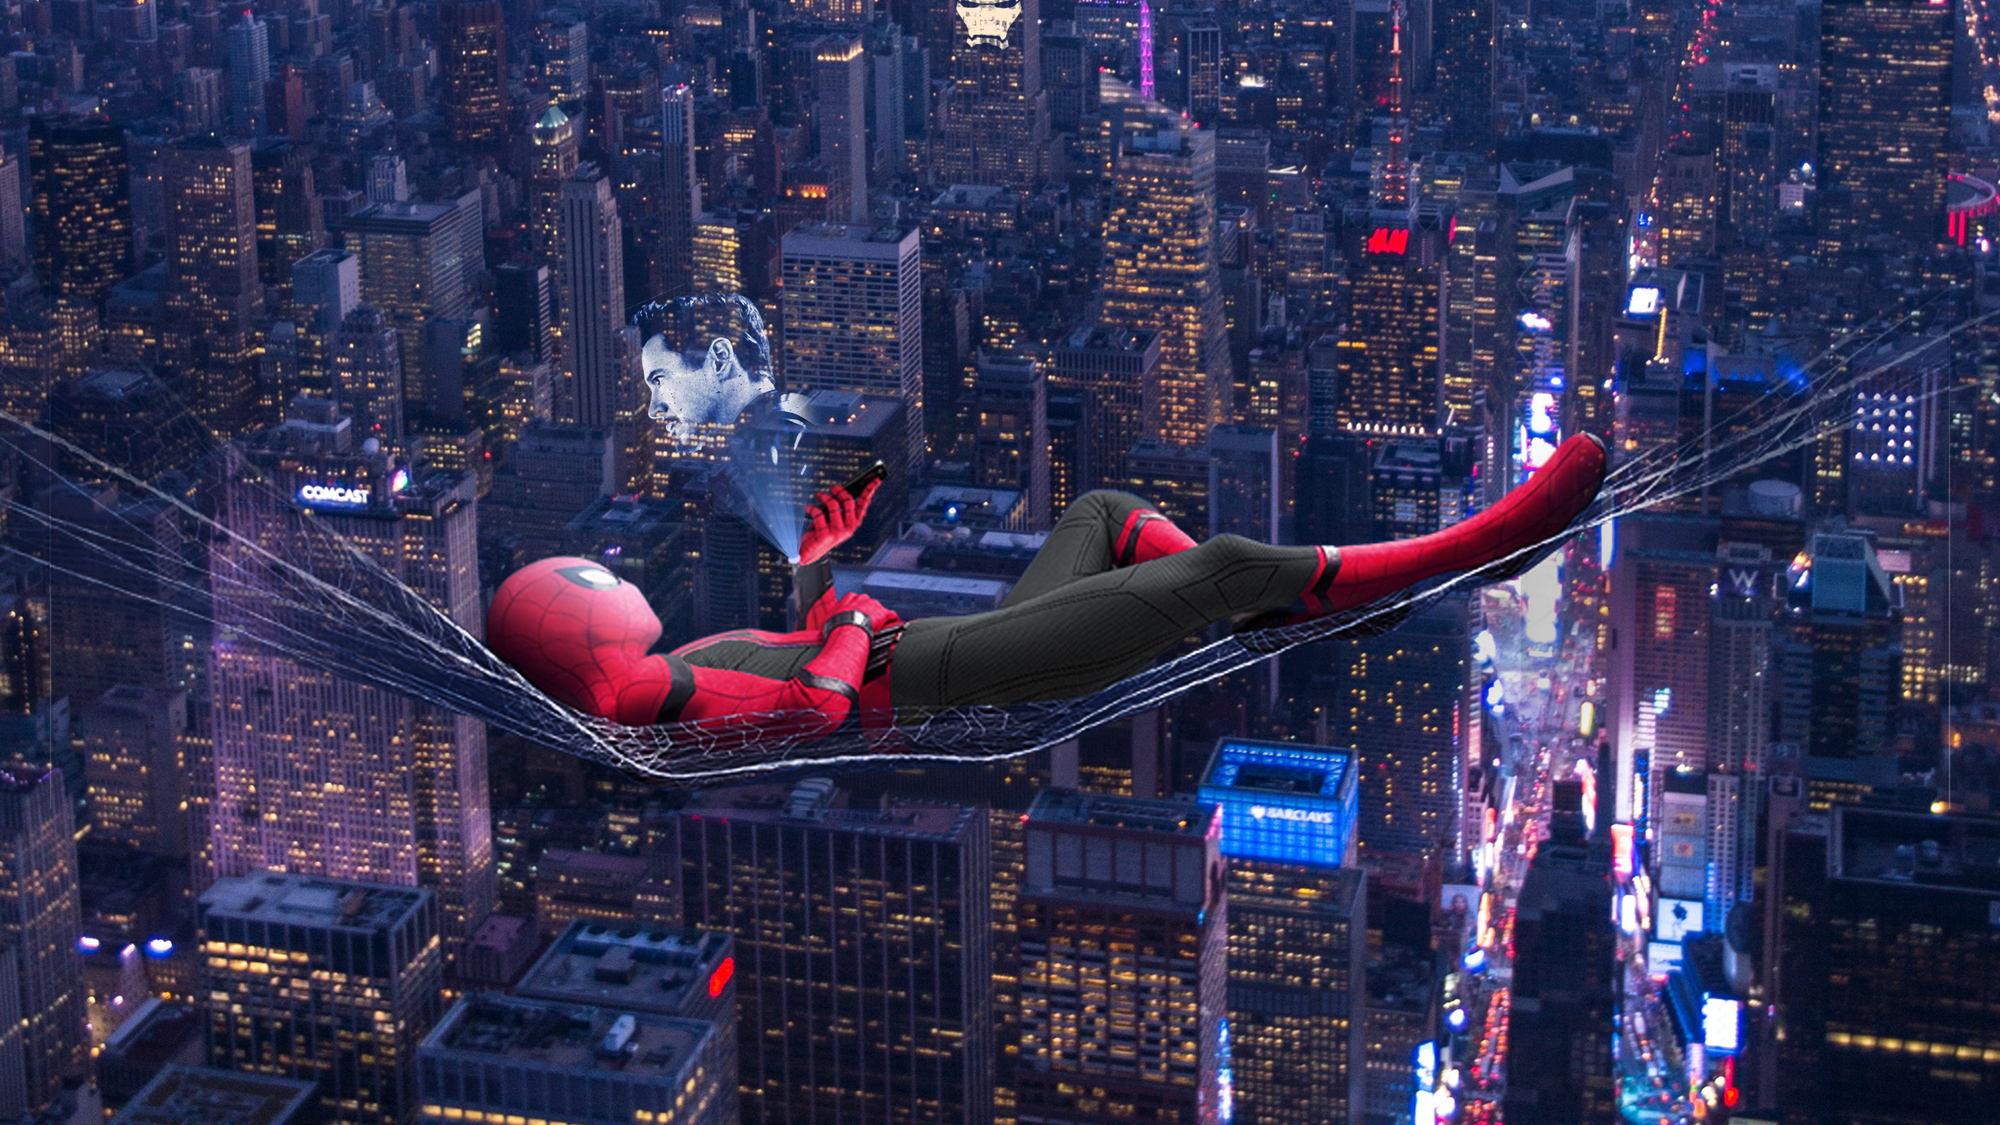 Spider-Man: Far From Home for apple download